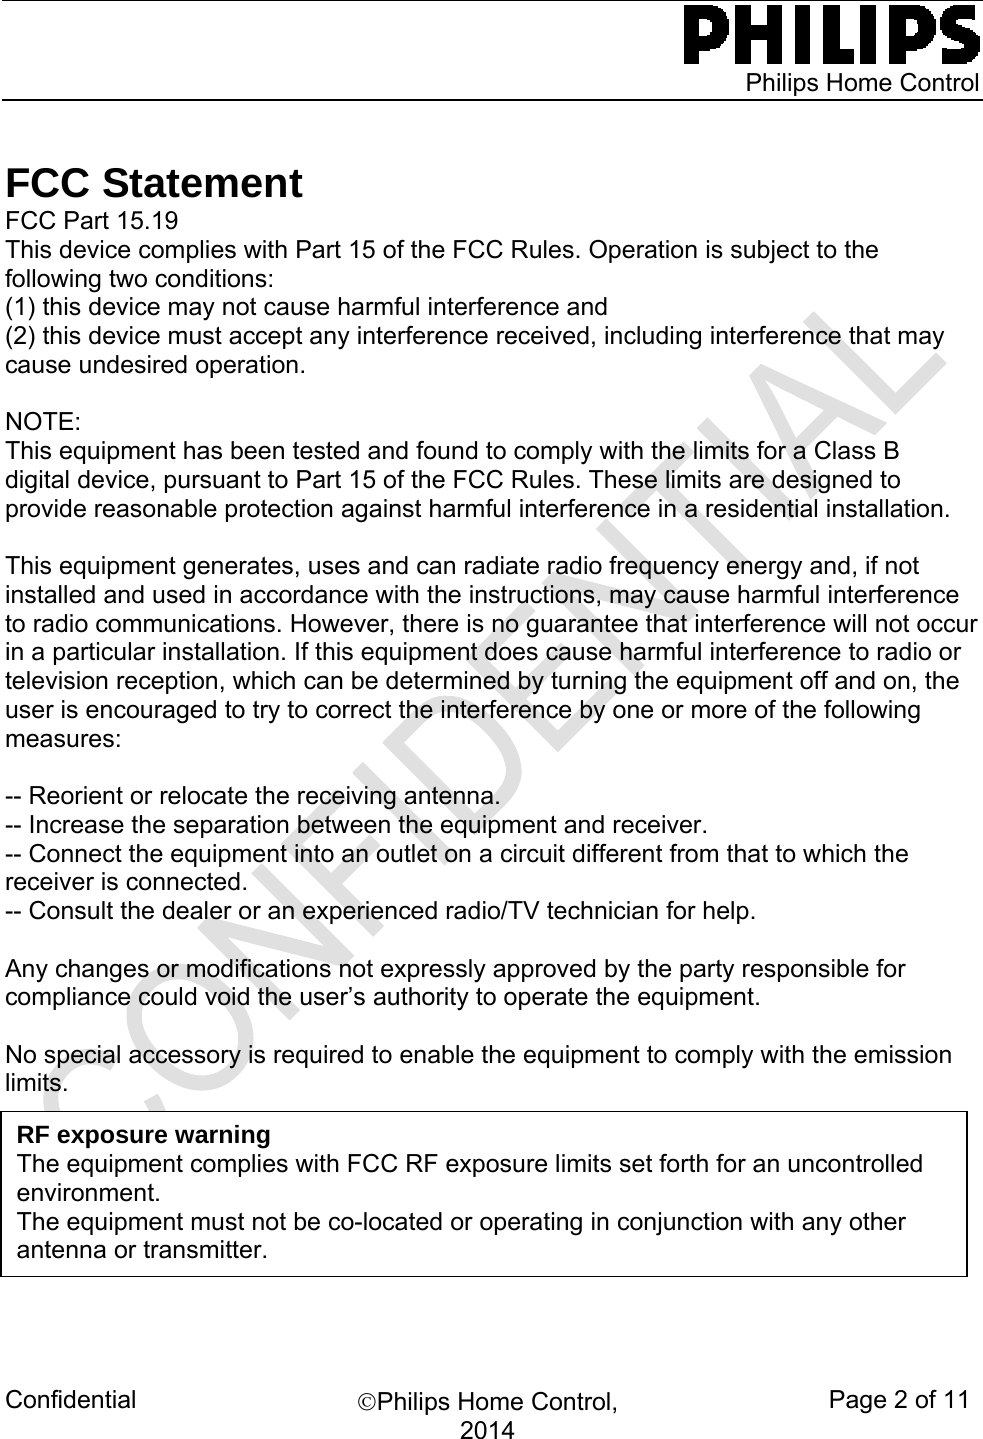    Philips Home Control Confidential  Philips Home Control, 2014 Page 2 of 11              FCC Statement FCC Part 15.19 This device complies with Part 15 of the FCC Rules. Operation is subject to the following two conditions:  (1) this device may not cause harmful interference and  (2) this device must accept any interference received, including interference that may cause undesired operation.  NOTE:  This equipment has been tested and found to comply with the limits for a Class B digital device, pursuant to Part 15 of the FCC Rules. These limits are designed to provide reasonable protection against harmful interference in a residential installation.   This equipment generates, uses and can radiate radio frequency energy and, if not installed and used in accordance with the instructions, may cause harmful interference to radio communications. However, there is no guarantee that interference will not occur in a particular installation. If this equipment does cause harmful interference to radio or television reception, which can be determined by turning the equipment off and on, the user is encouraged to try to correct the interference by one or more of the following measures:  -- Reorient or relocate the receiving antenna. -- Increase the separation between the equipment and receiver. -- Connect the equipment into an outlet on a circuit different from that to which the receiver is connected. -- Consult the dealer or an experienced radio/TV technician for help.  Any changes or modifications not expressly approved by the party responsible for compliance could void the user’s authority to operate the equipment.  No special accessory is required to enable the equipment to comply with the emission limits.                                 RF exposure warning   The equipment complies with FCC RF exposure limits set forth for an uncontrolled environment. The equipment must not be co-located or operating in conjunction with any other antenna or transmitter. 